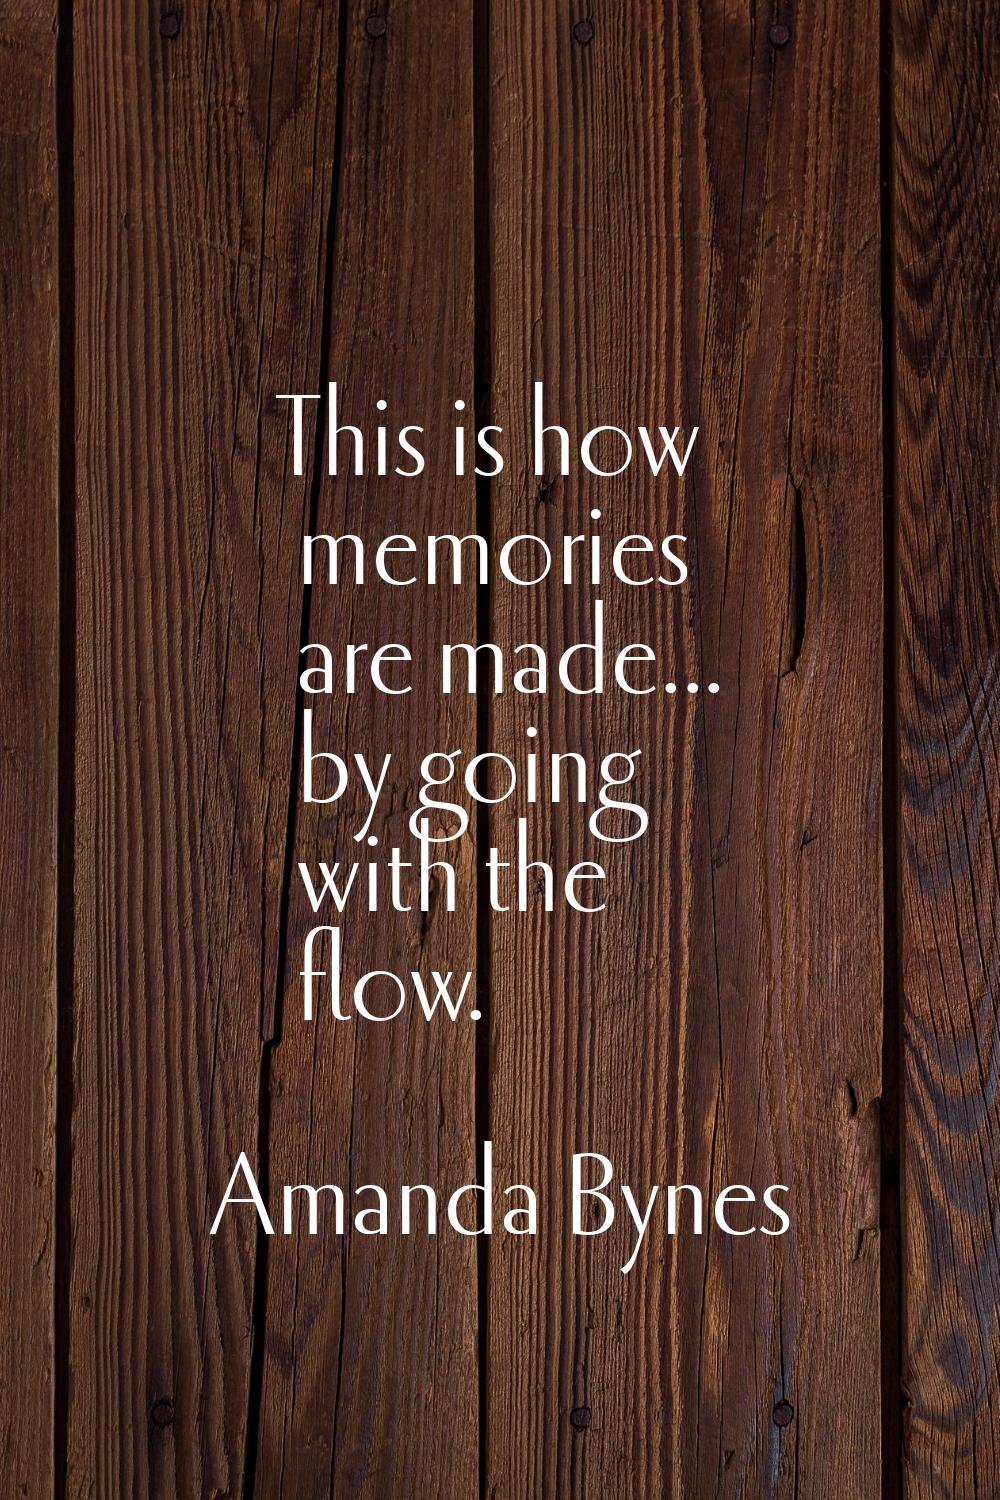 This is how memories are made... by going with the flow.